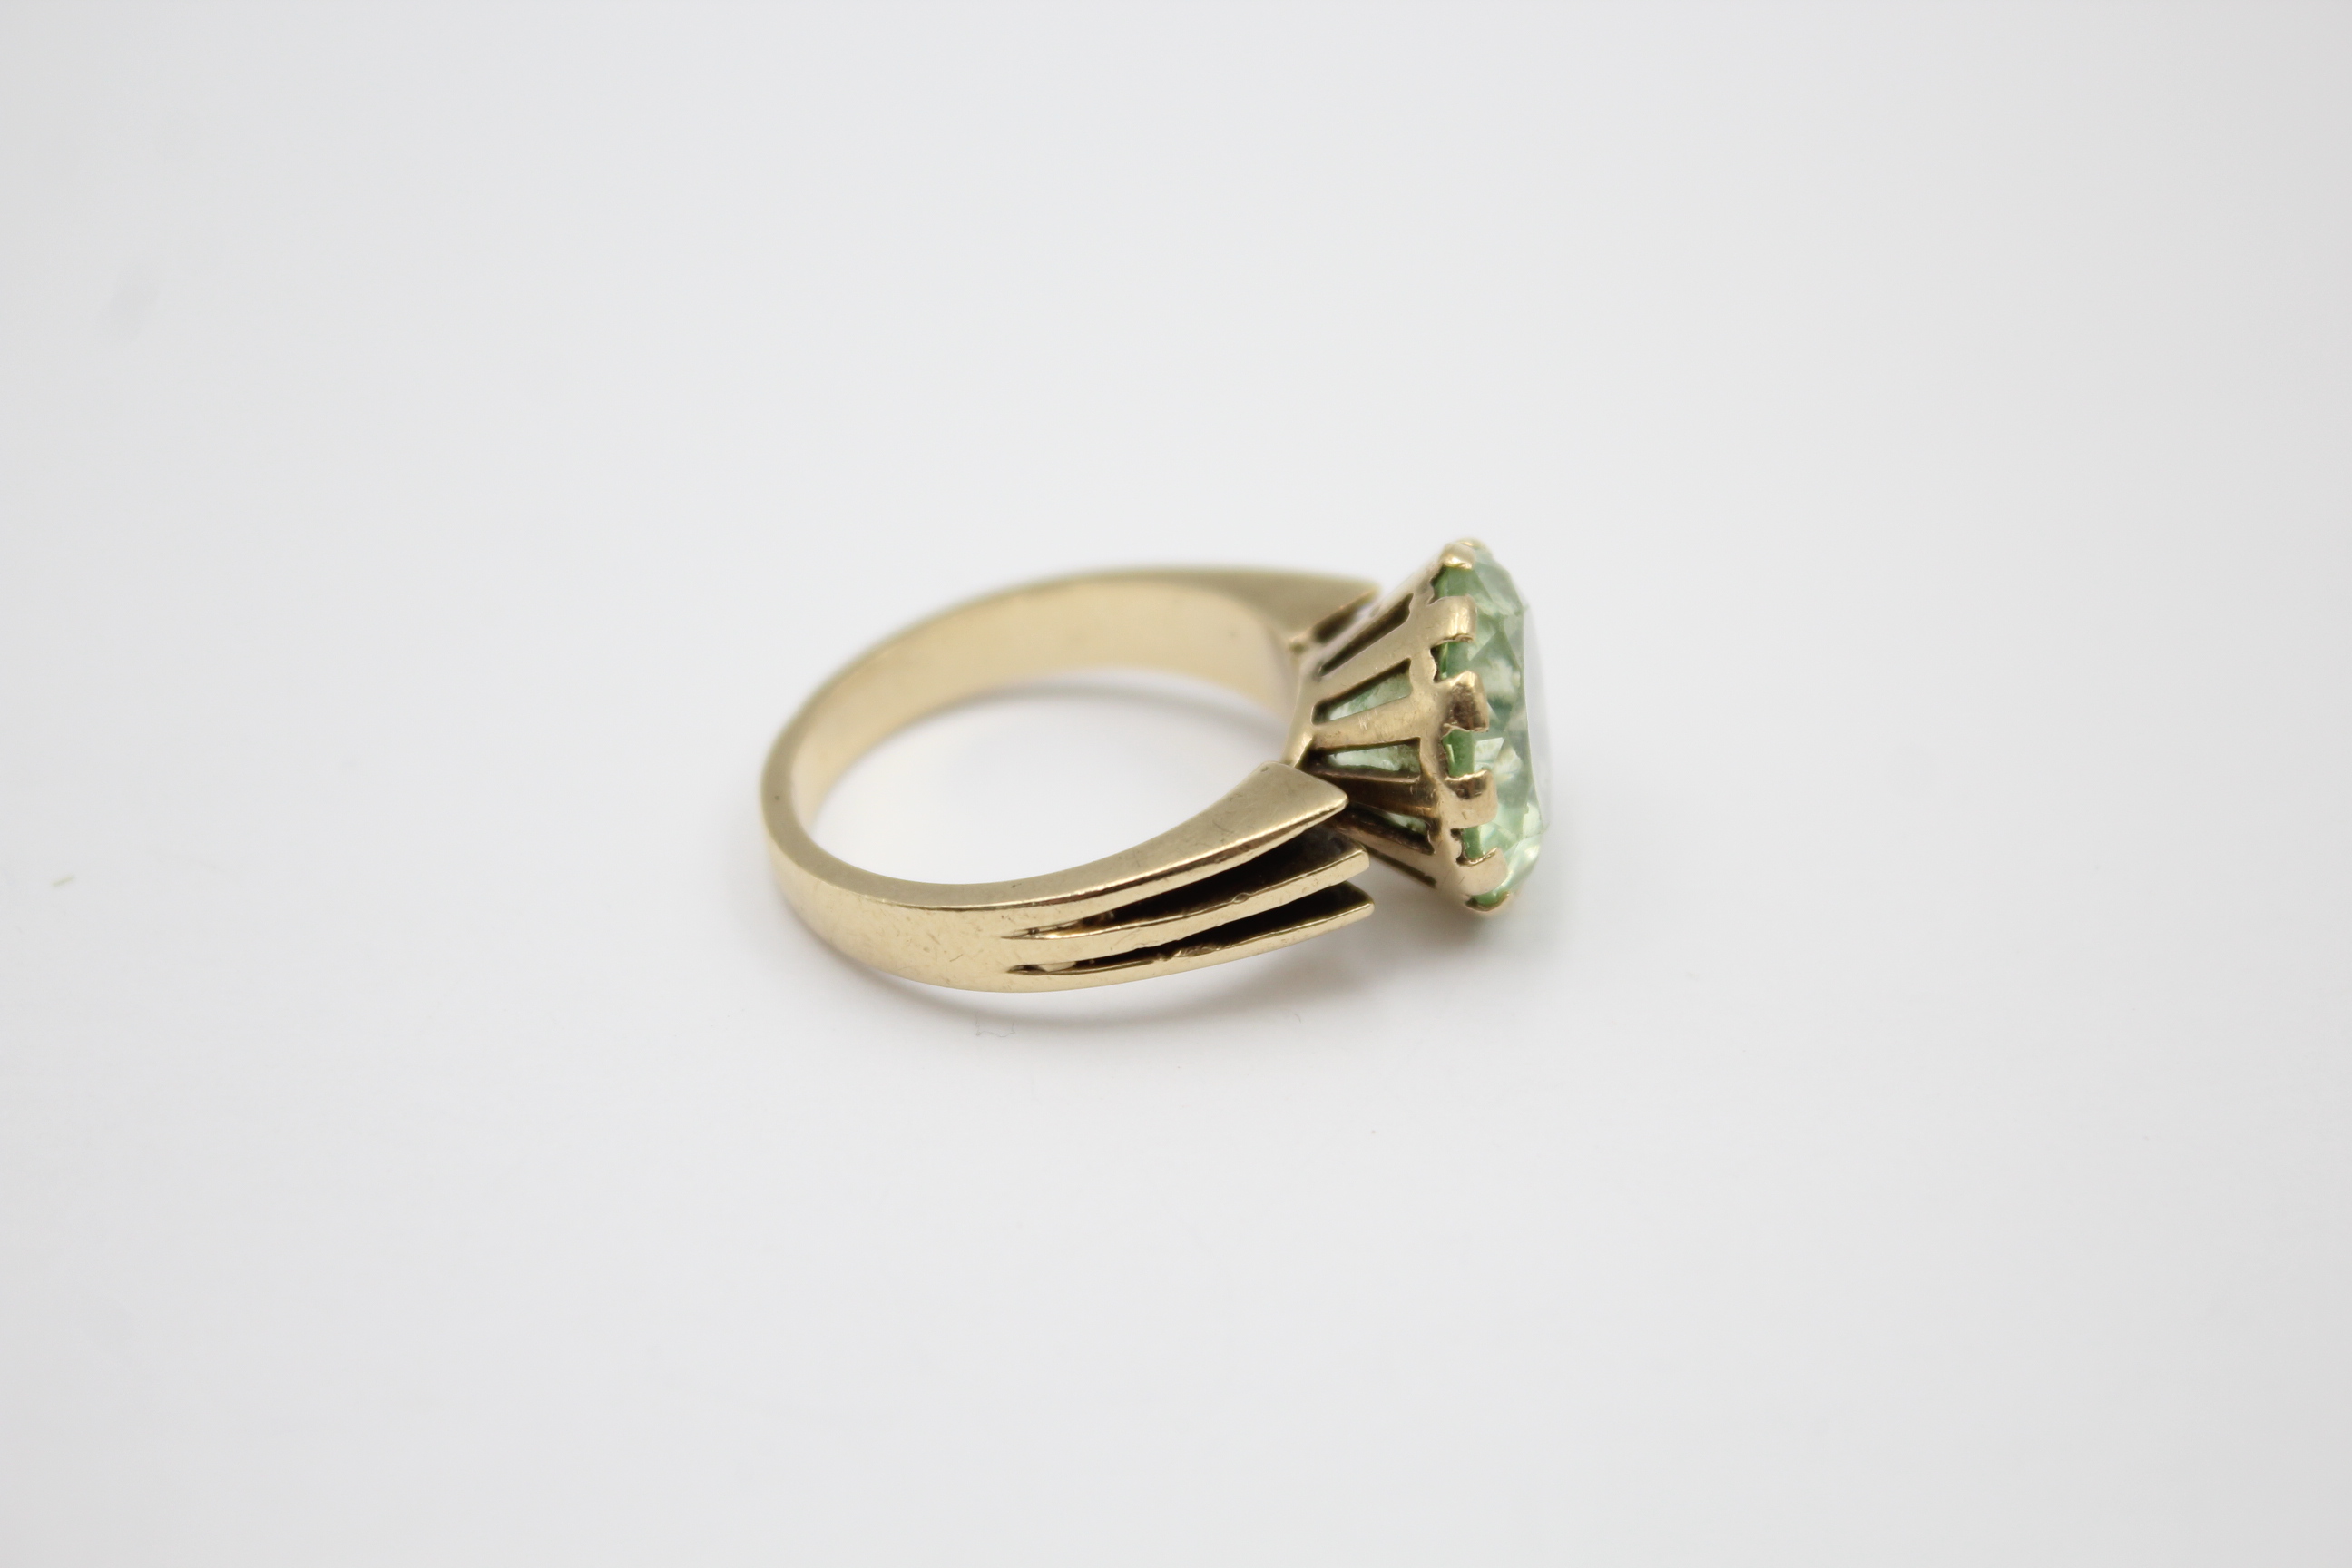 9ct gold synthetic spinel cocktail ring (5.4g) - Image 2 of 4